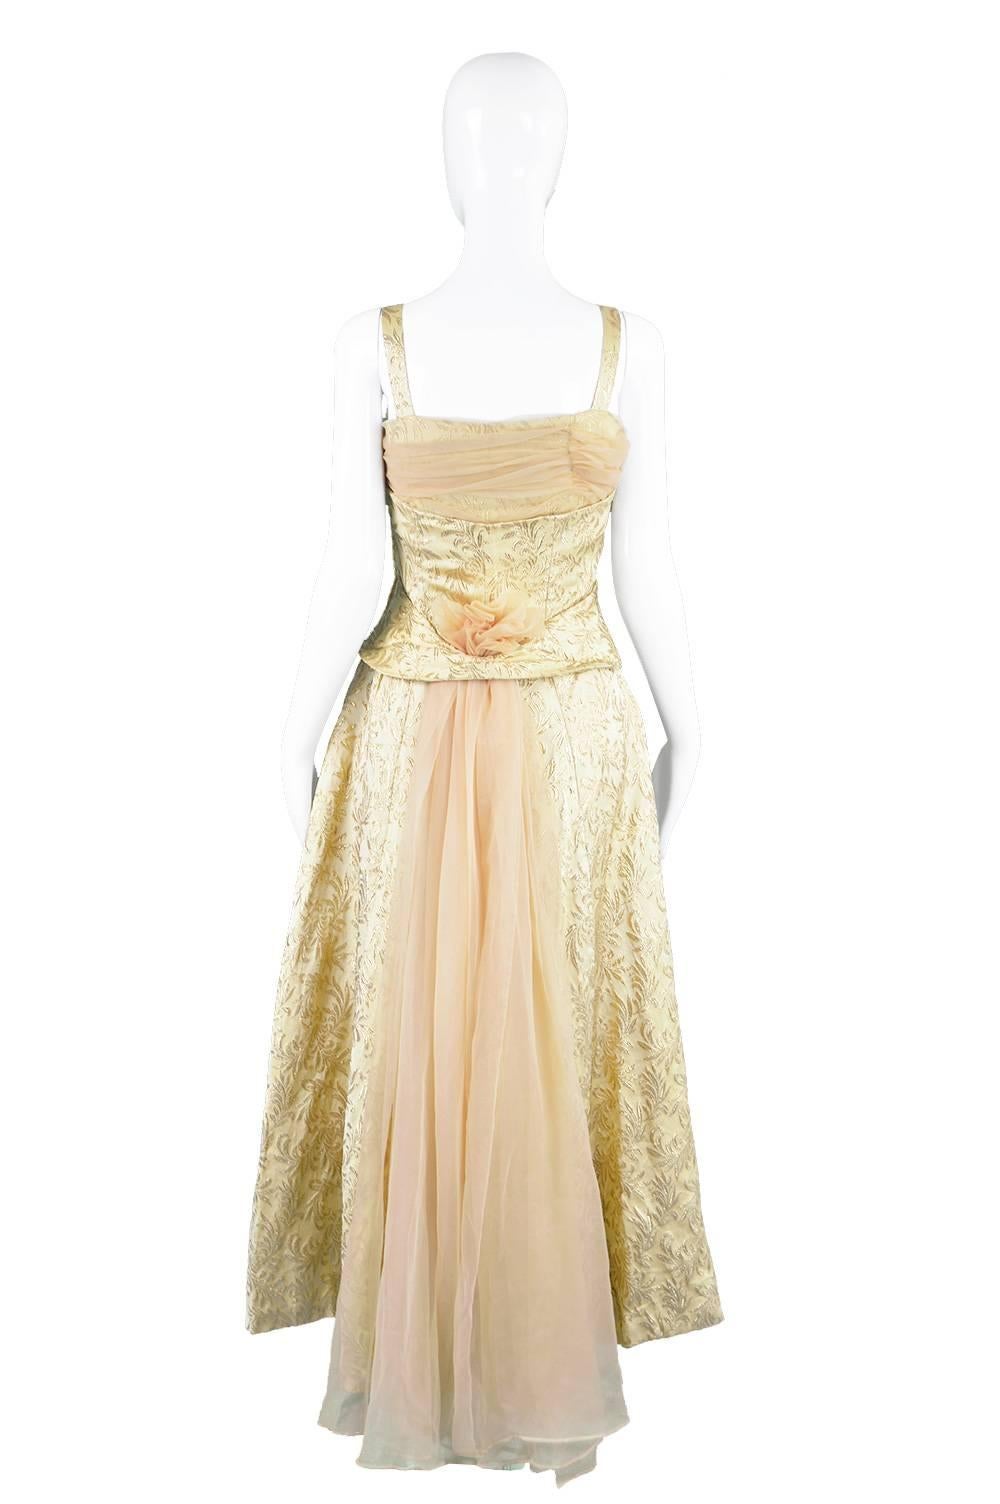 Gold Brocade Evening Gown with Chiffon Train, 1950s For Sale 1